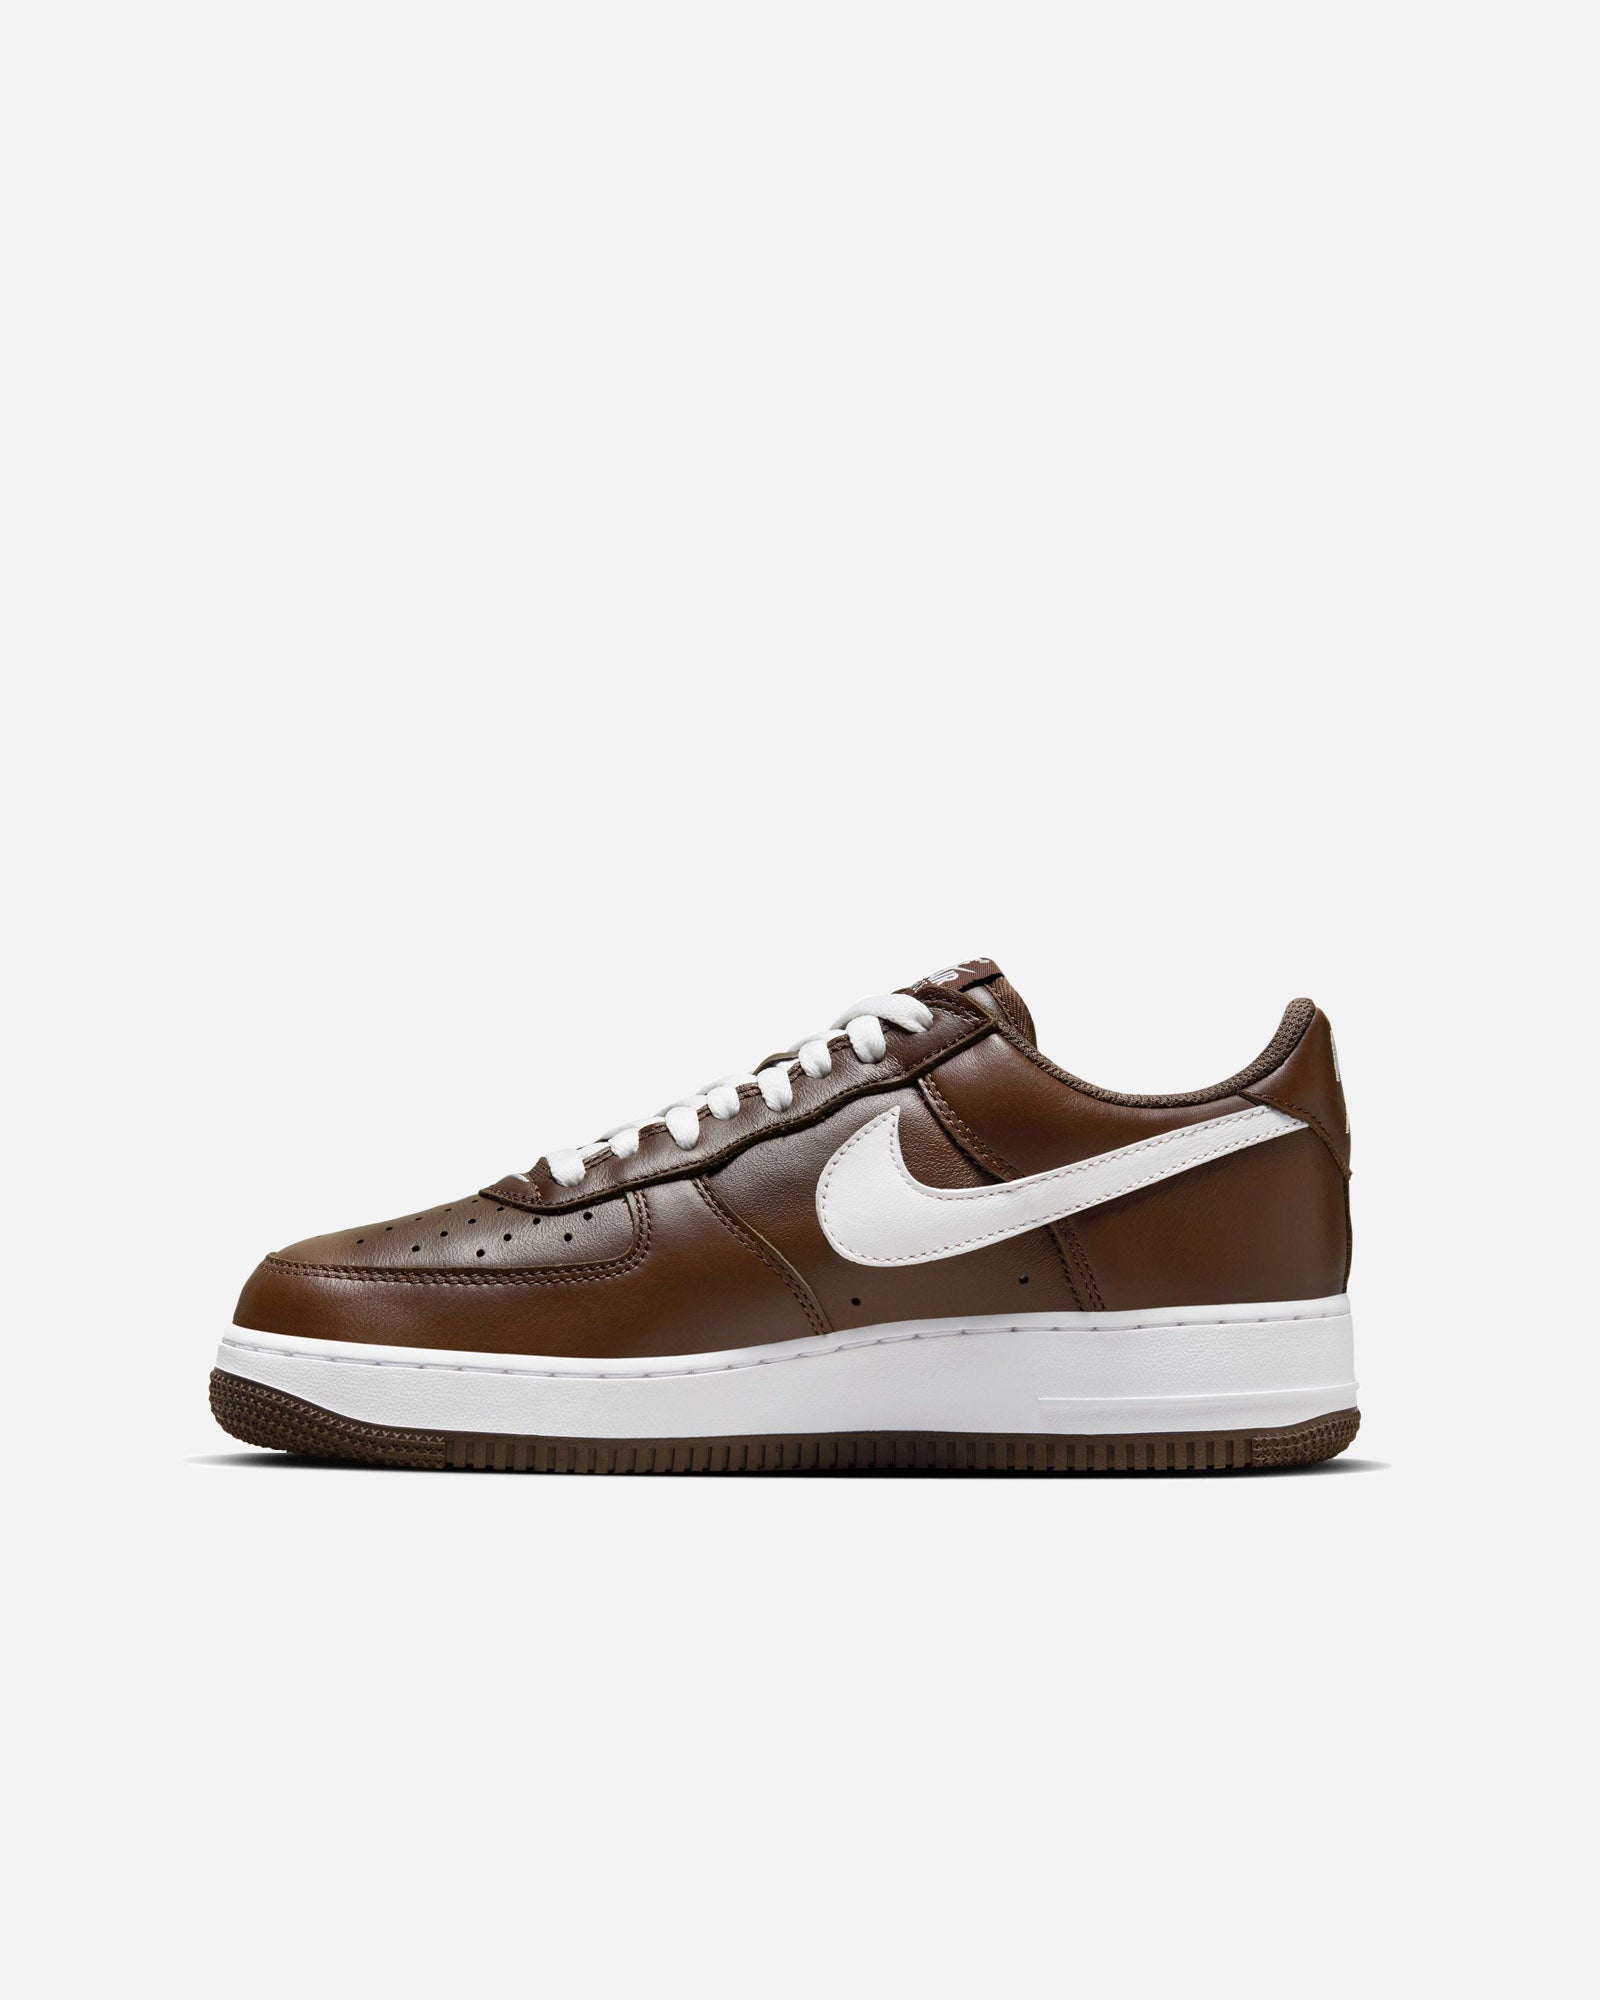 Nike Air Force 1 Low Retro QS "Chocolate" image